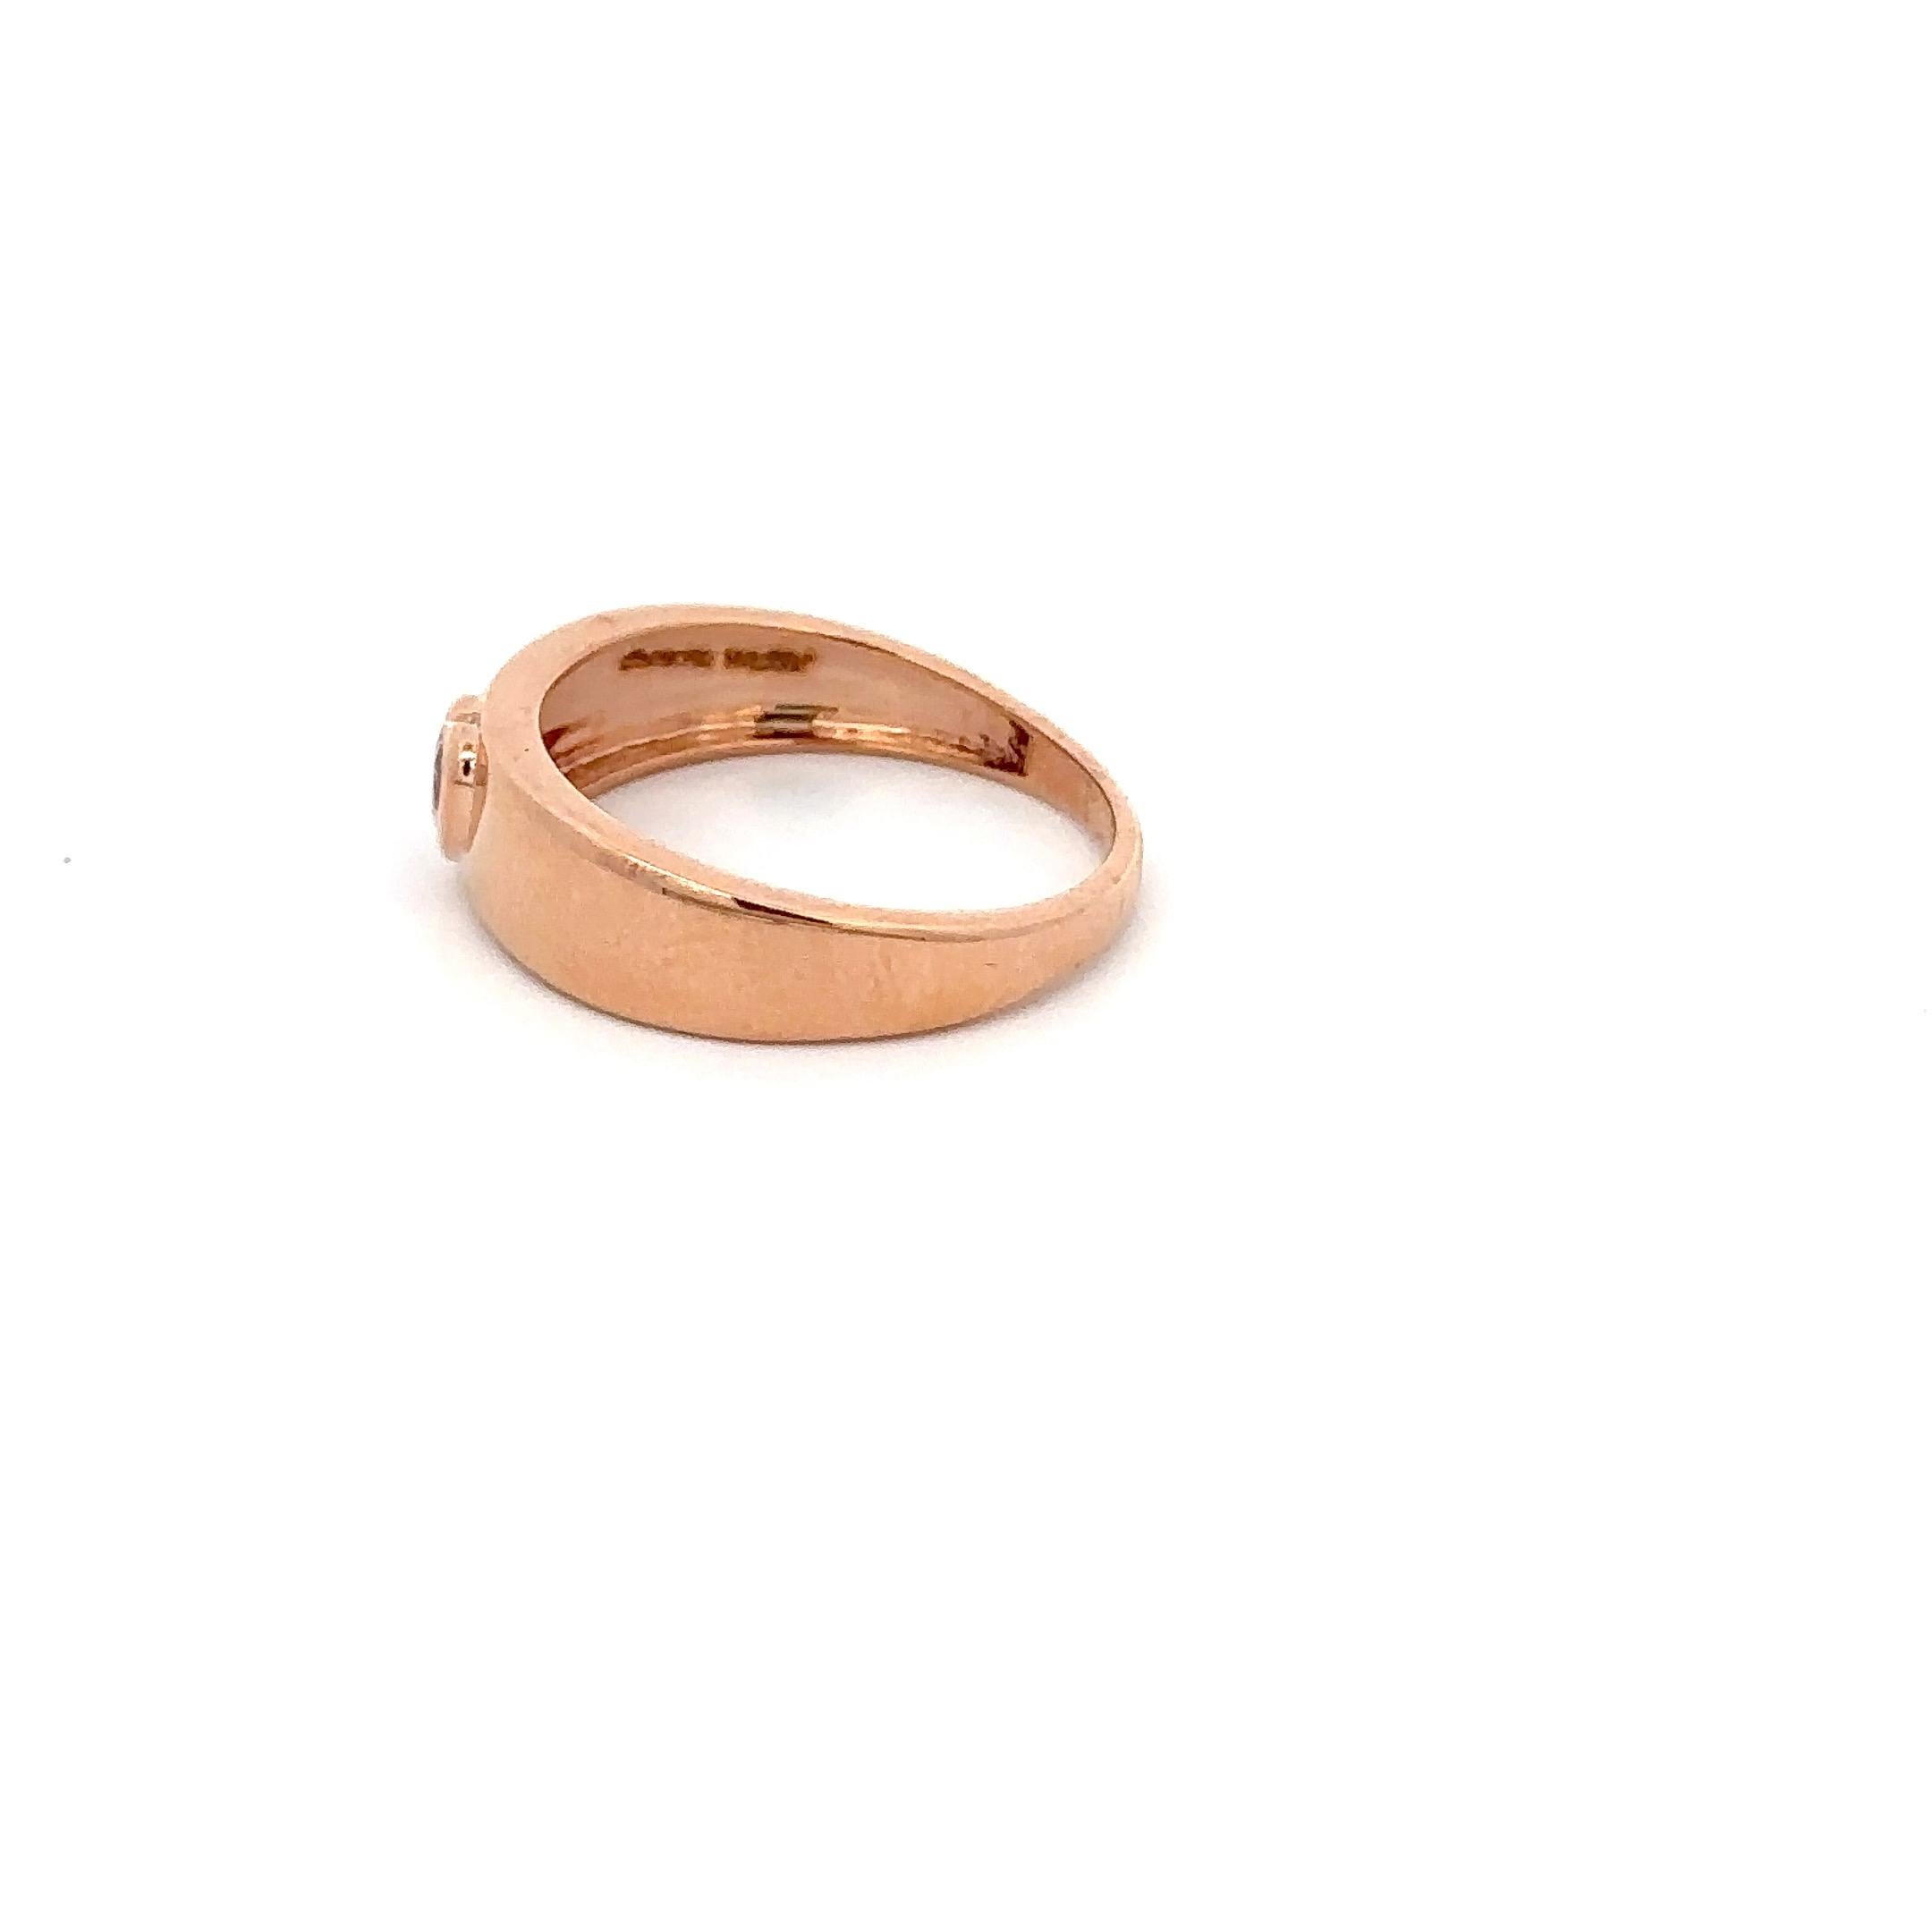 For Sale:  18k Solid Rose Gold Signet Ring Dainty Heart Cut Pink Sapphire Pinky Ring  7